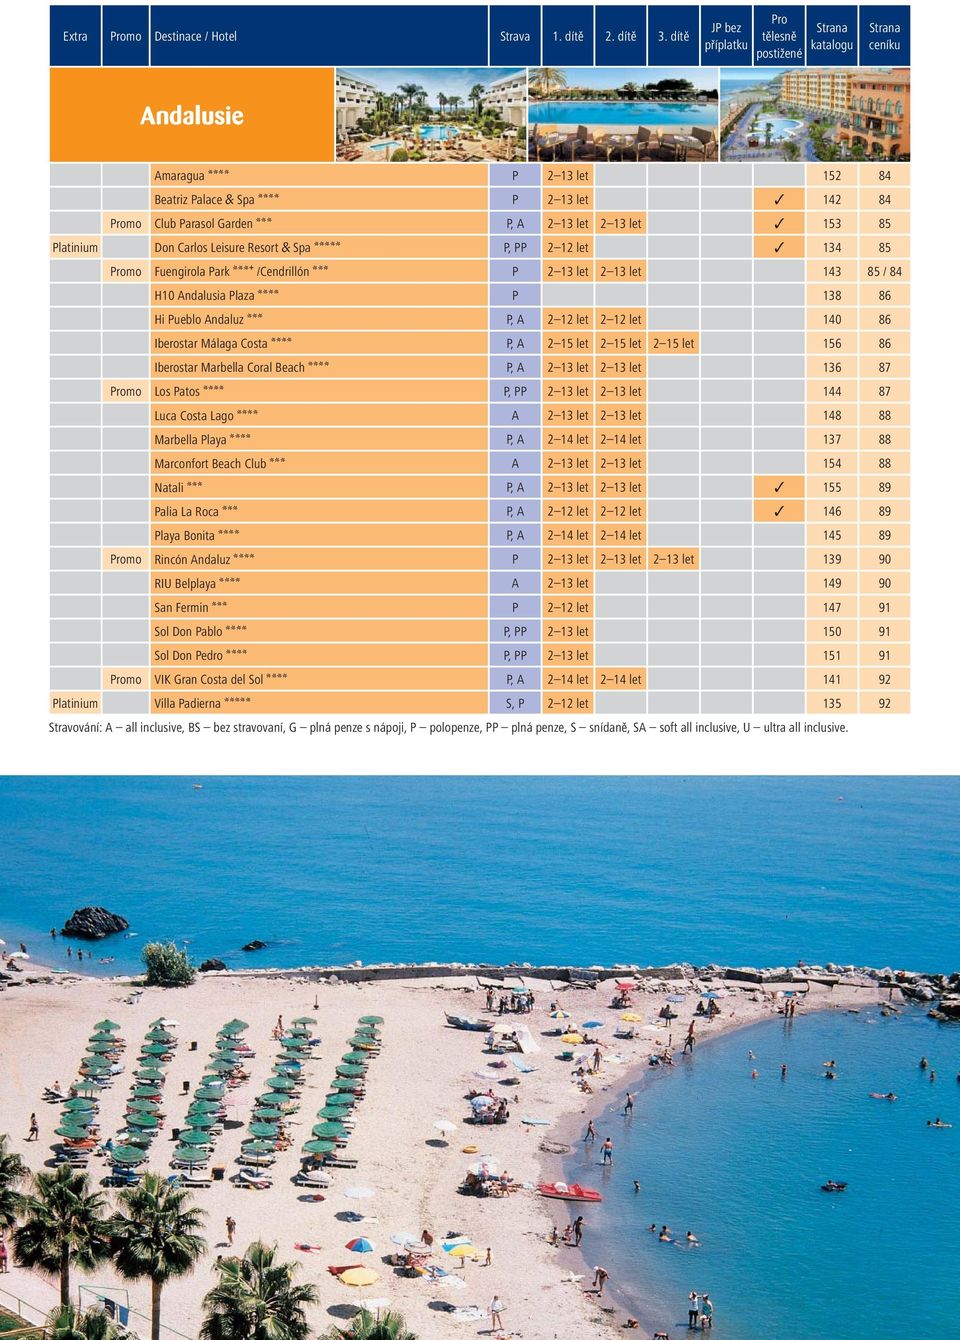 let 2 13 let 153 85 Platinium Don Carlos Leisure Resort & Spa aaaaa P, PP 2 12 let 134 85 Promo Fuengirola Park aaab /Cendrillón aaa P 2 13 let 2 13 let 143 85 / 84 H10 Andalusia Plaza aaaa P 138 86